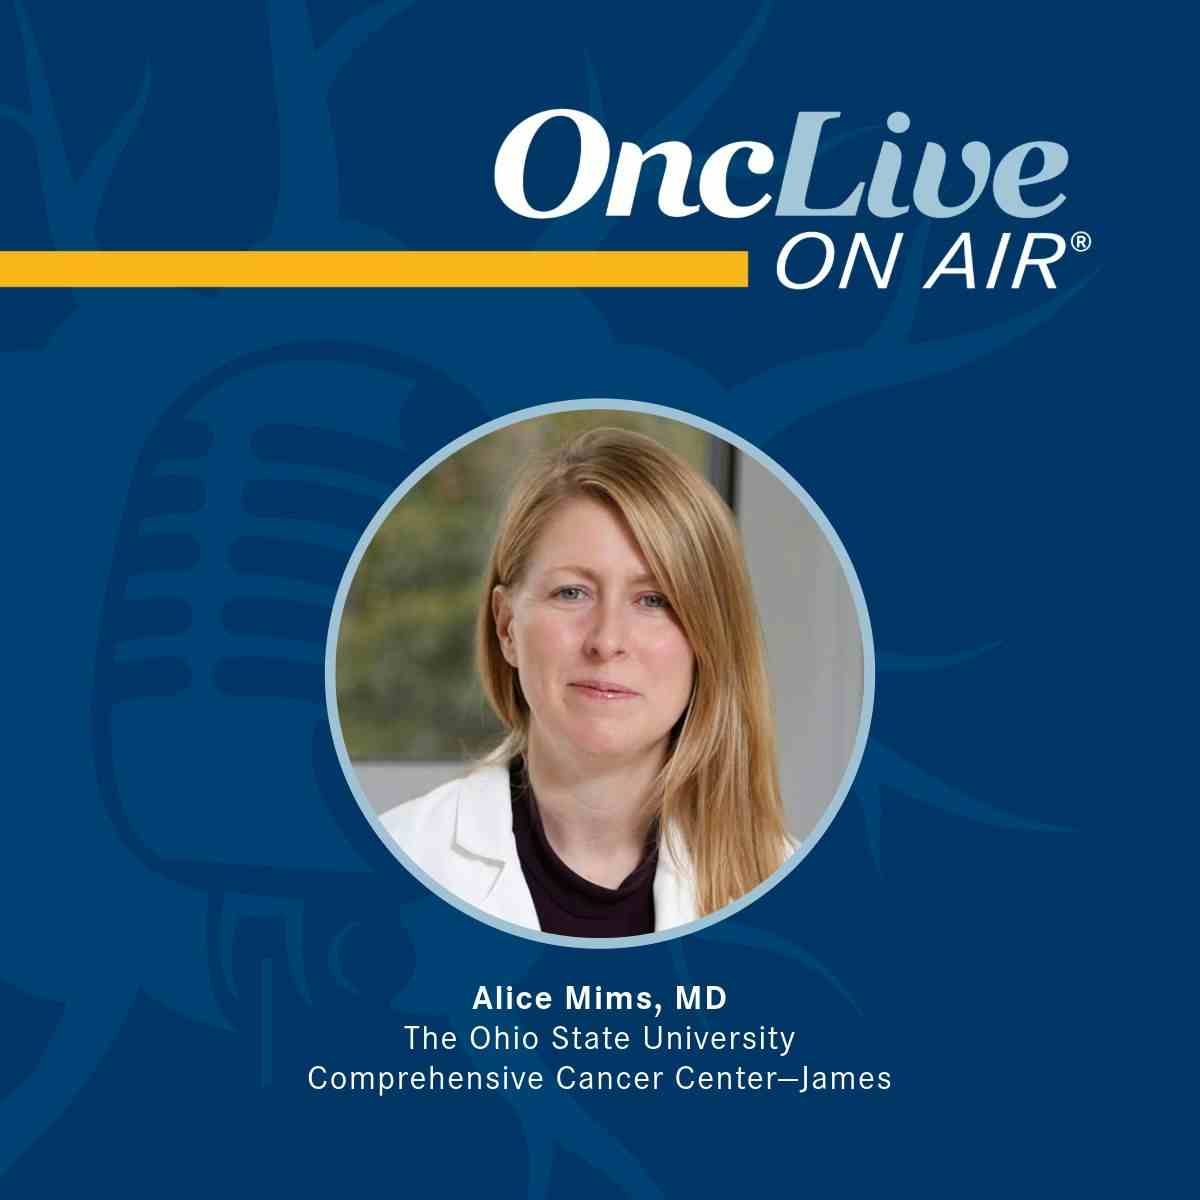 Alice Mims, MD, medical oncologist, associate professor, the Division of Hematology, The Ohio State University Comprehensive Cancer Center—James